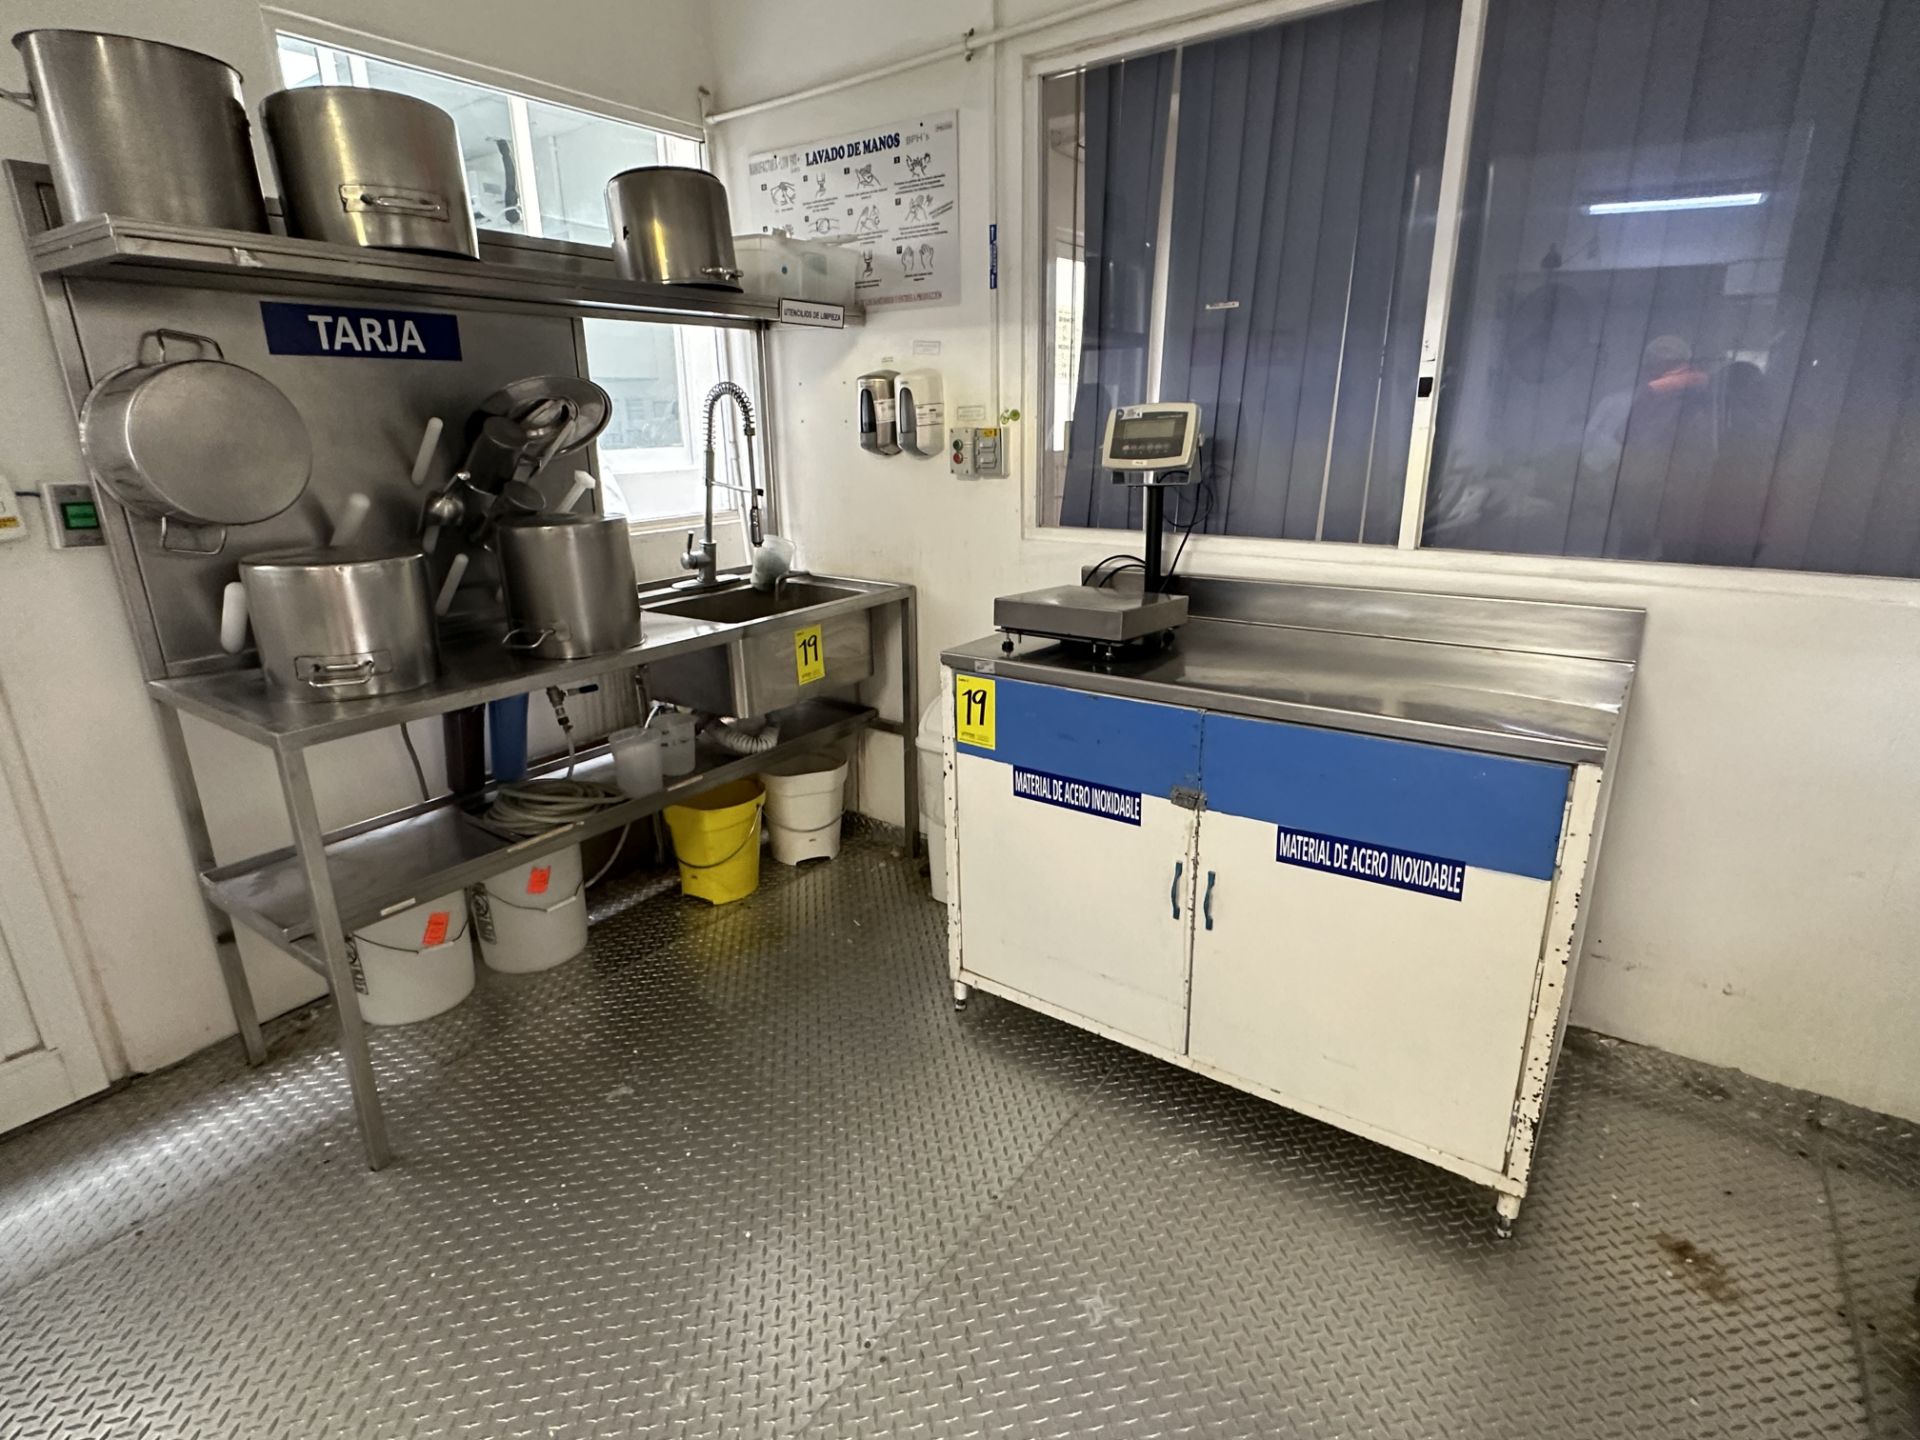 1 Laboratory cabinet with 2 doors with stainless steel cover measures approximately 1.20 x 0.60 x 0